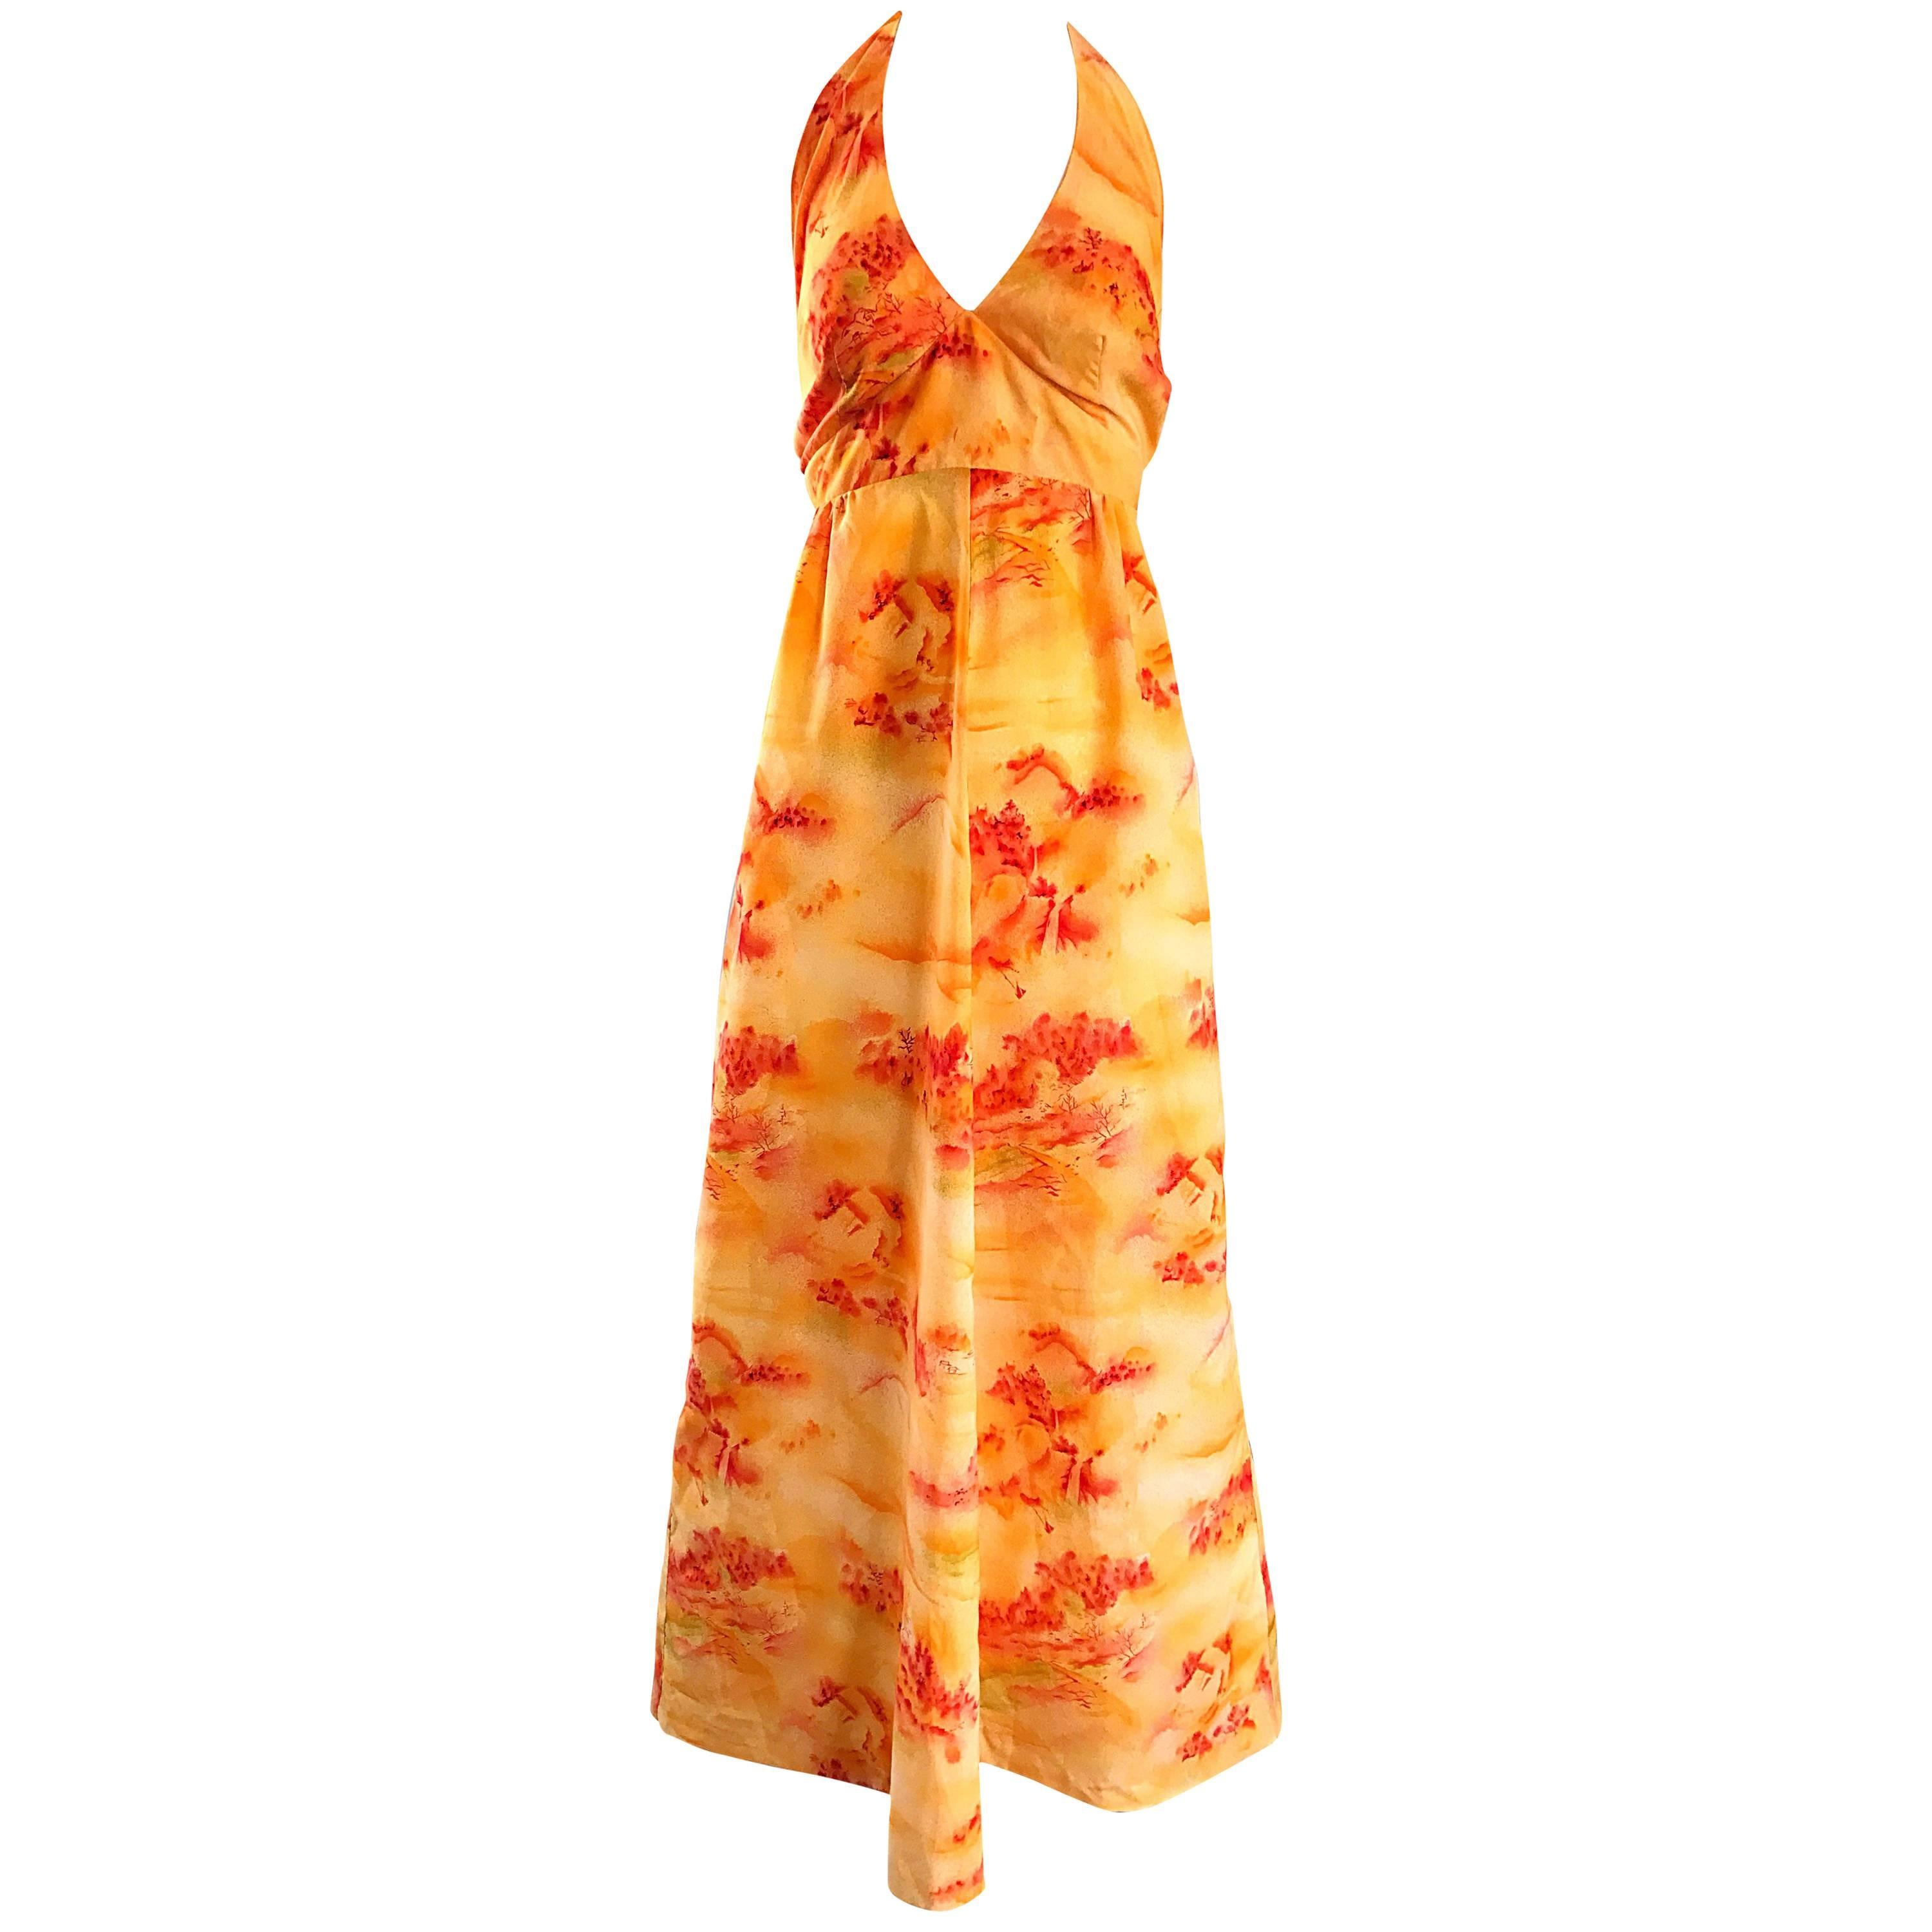 Incredible 1970s Asian Themed Bright Orange Vintage 70s Novelty Maxi Dress  For Sale